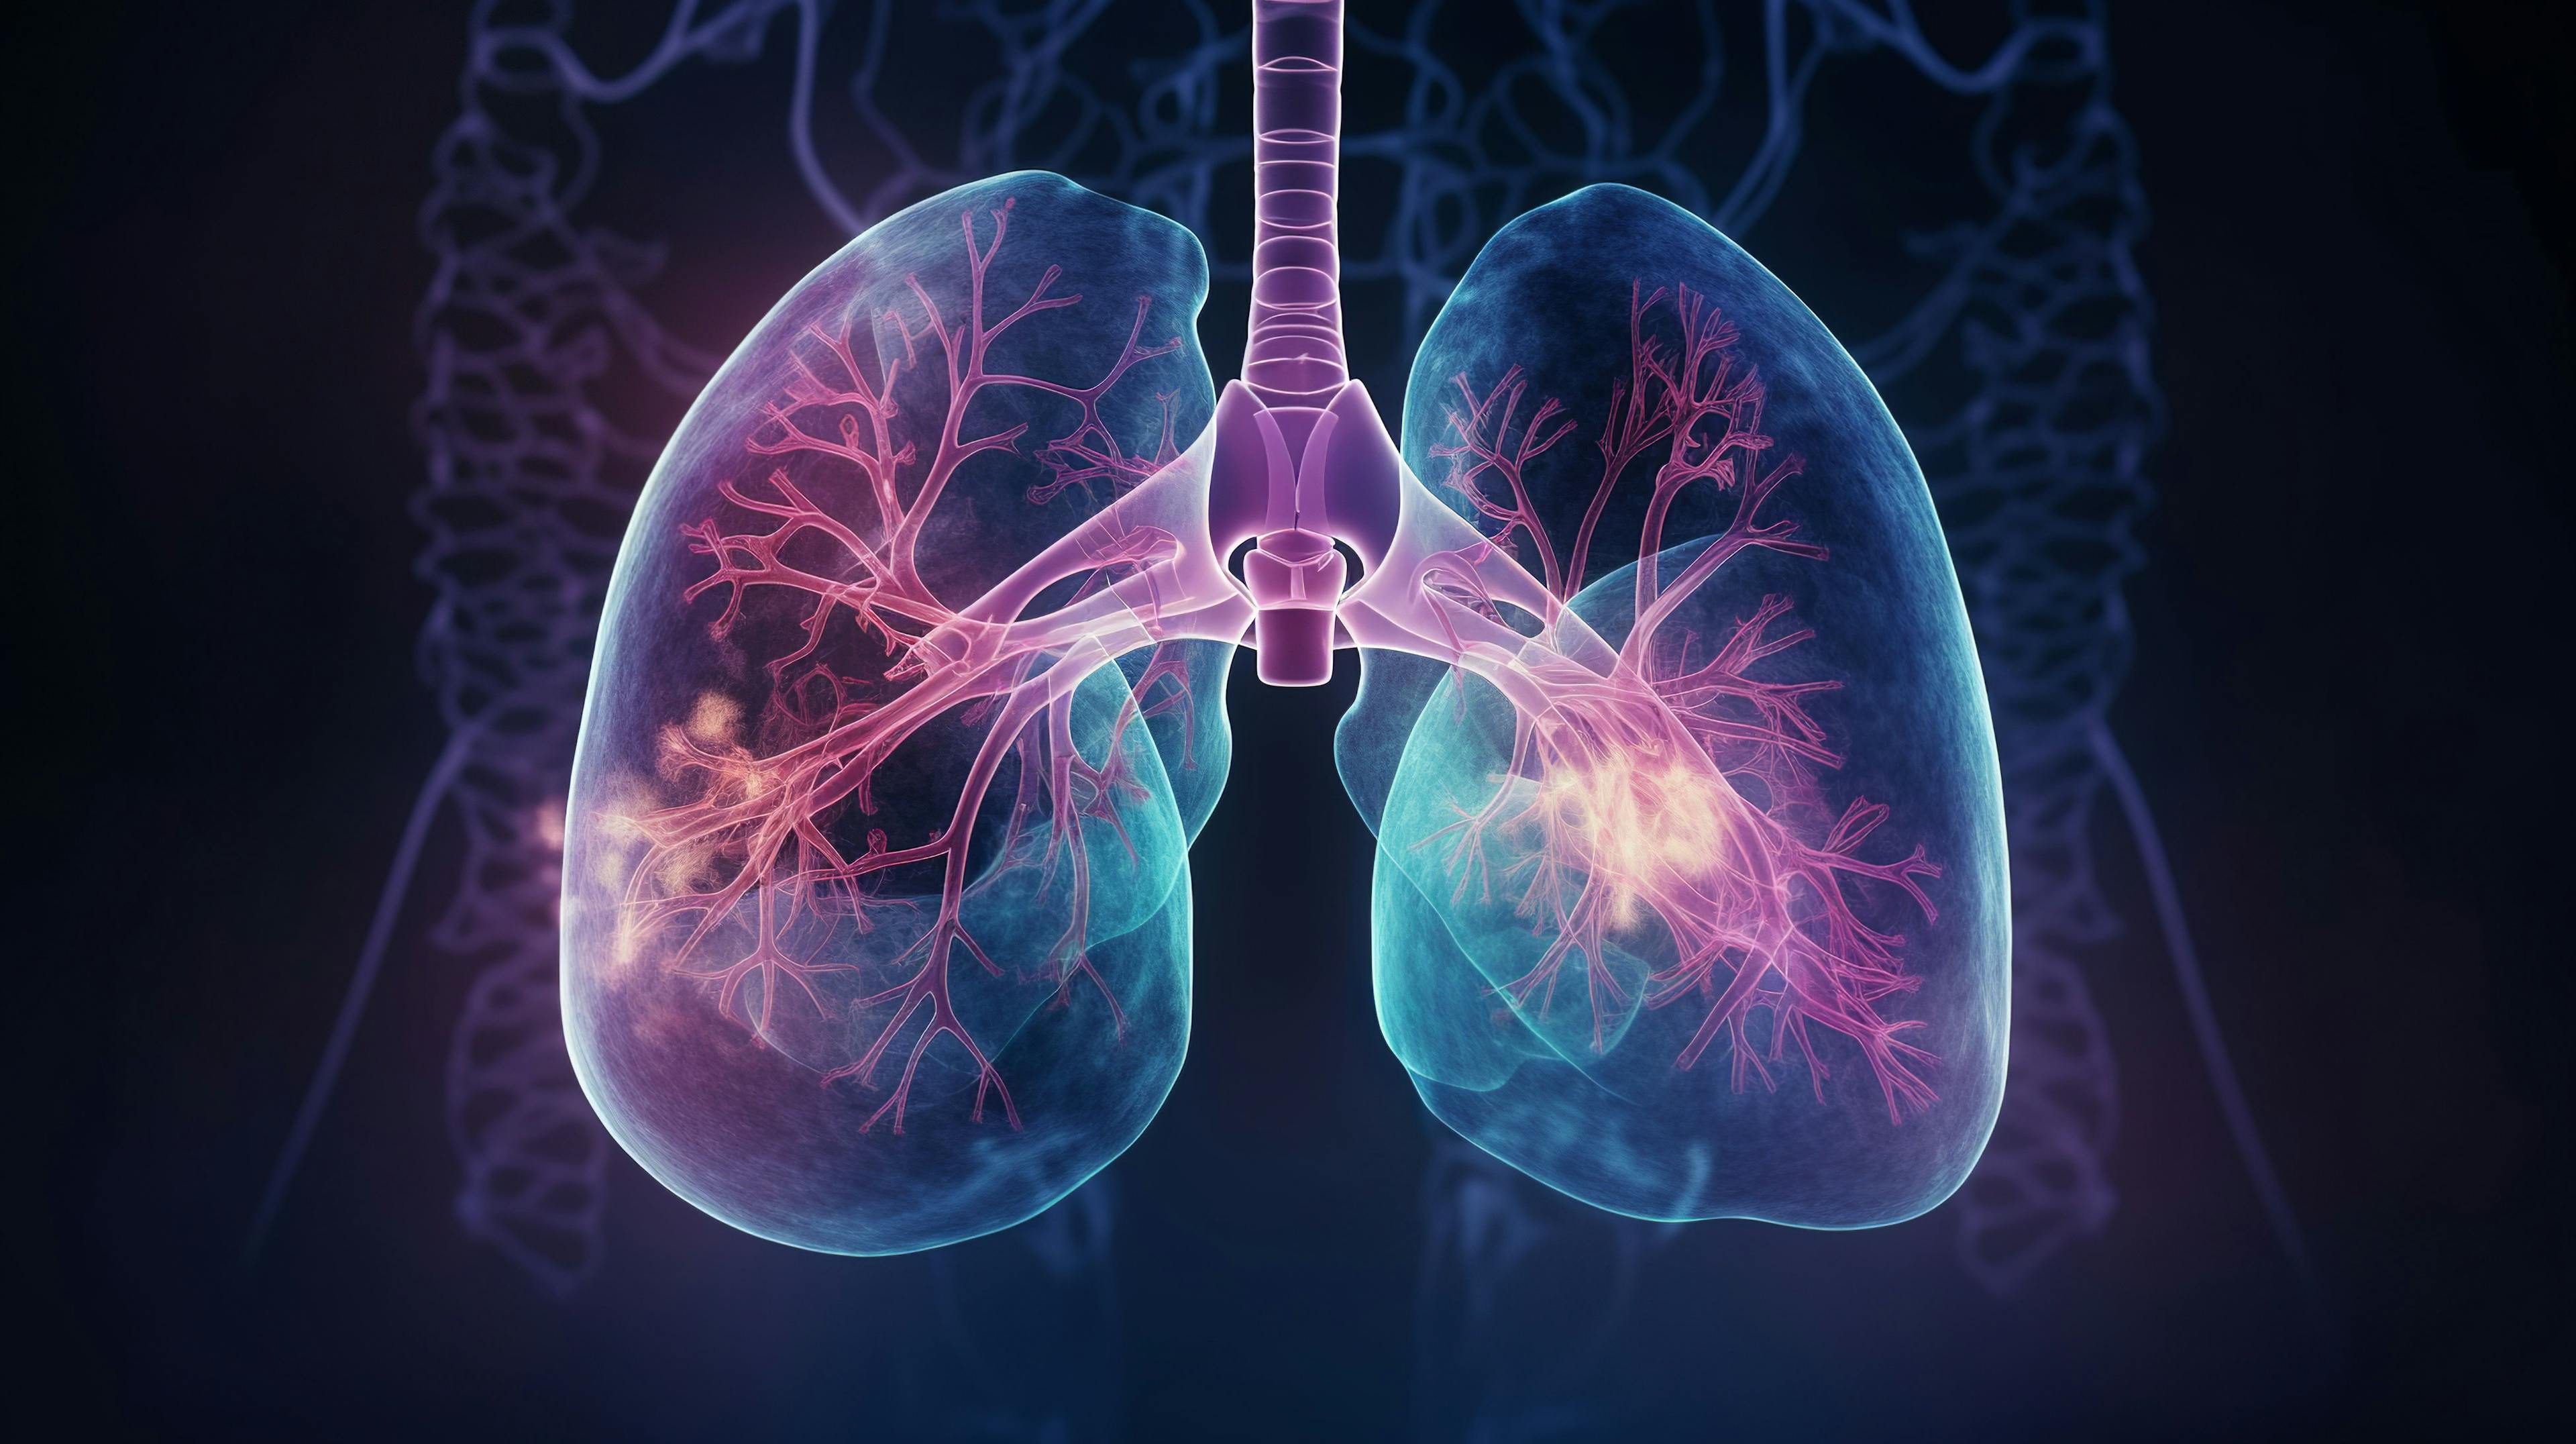 New Drug Shows Enduring Efficacy Against ROS1+ Non-Small Cell Lung Cancer